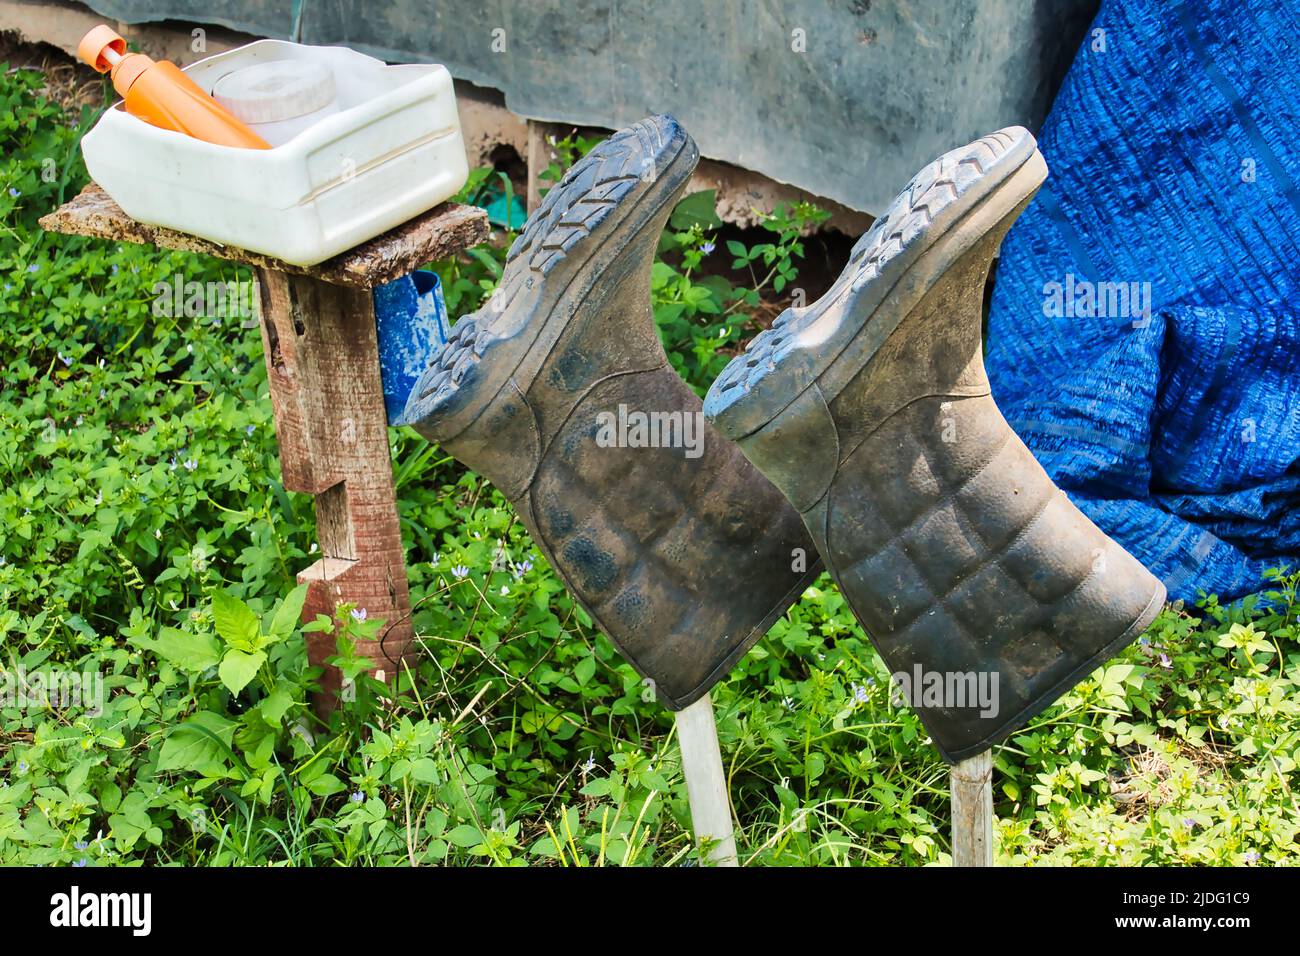 Precaution against the spread of swine diseases: rubber boots and disinfectant fluid at a piggery in Thailand Stock Photo